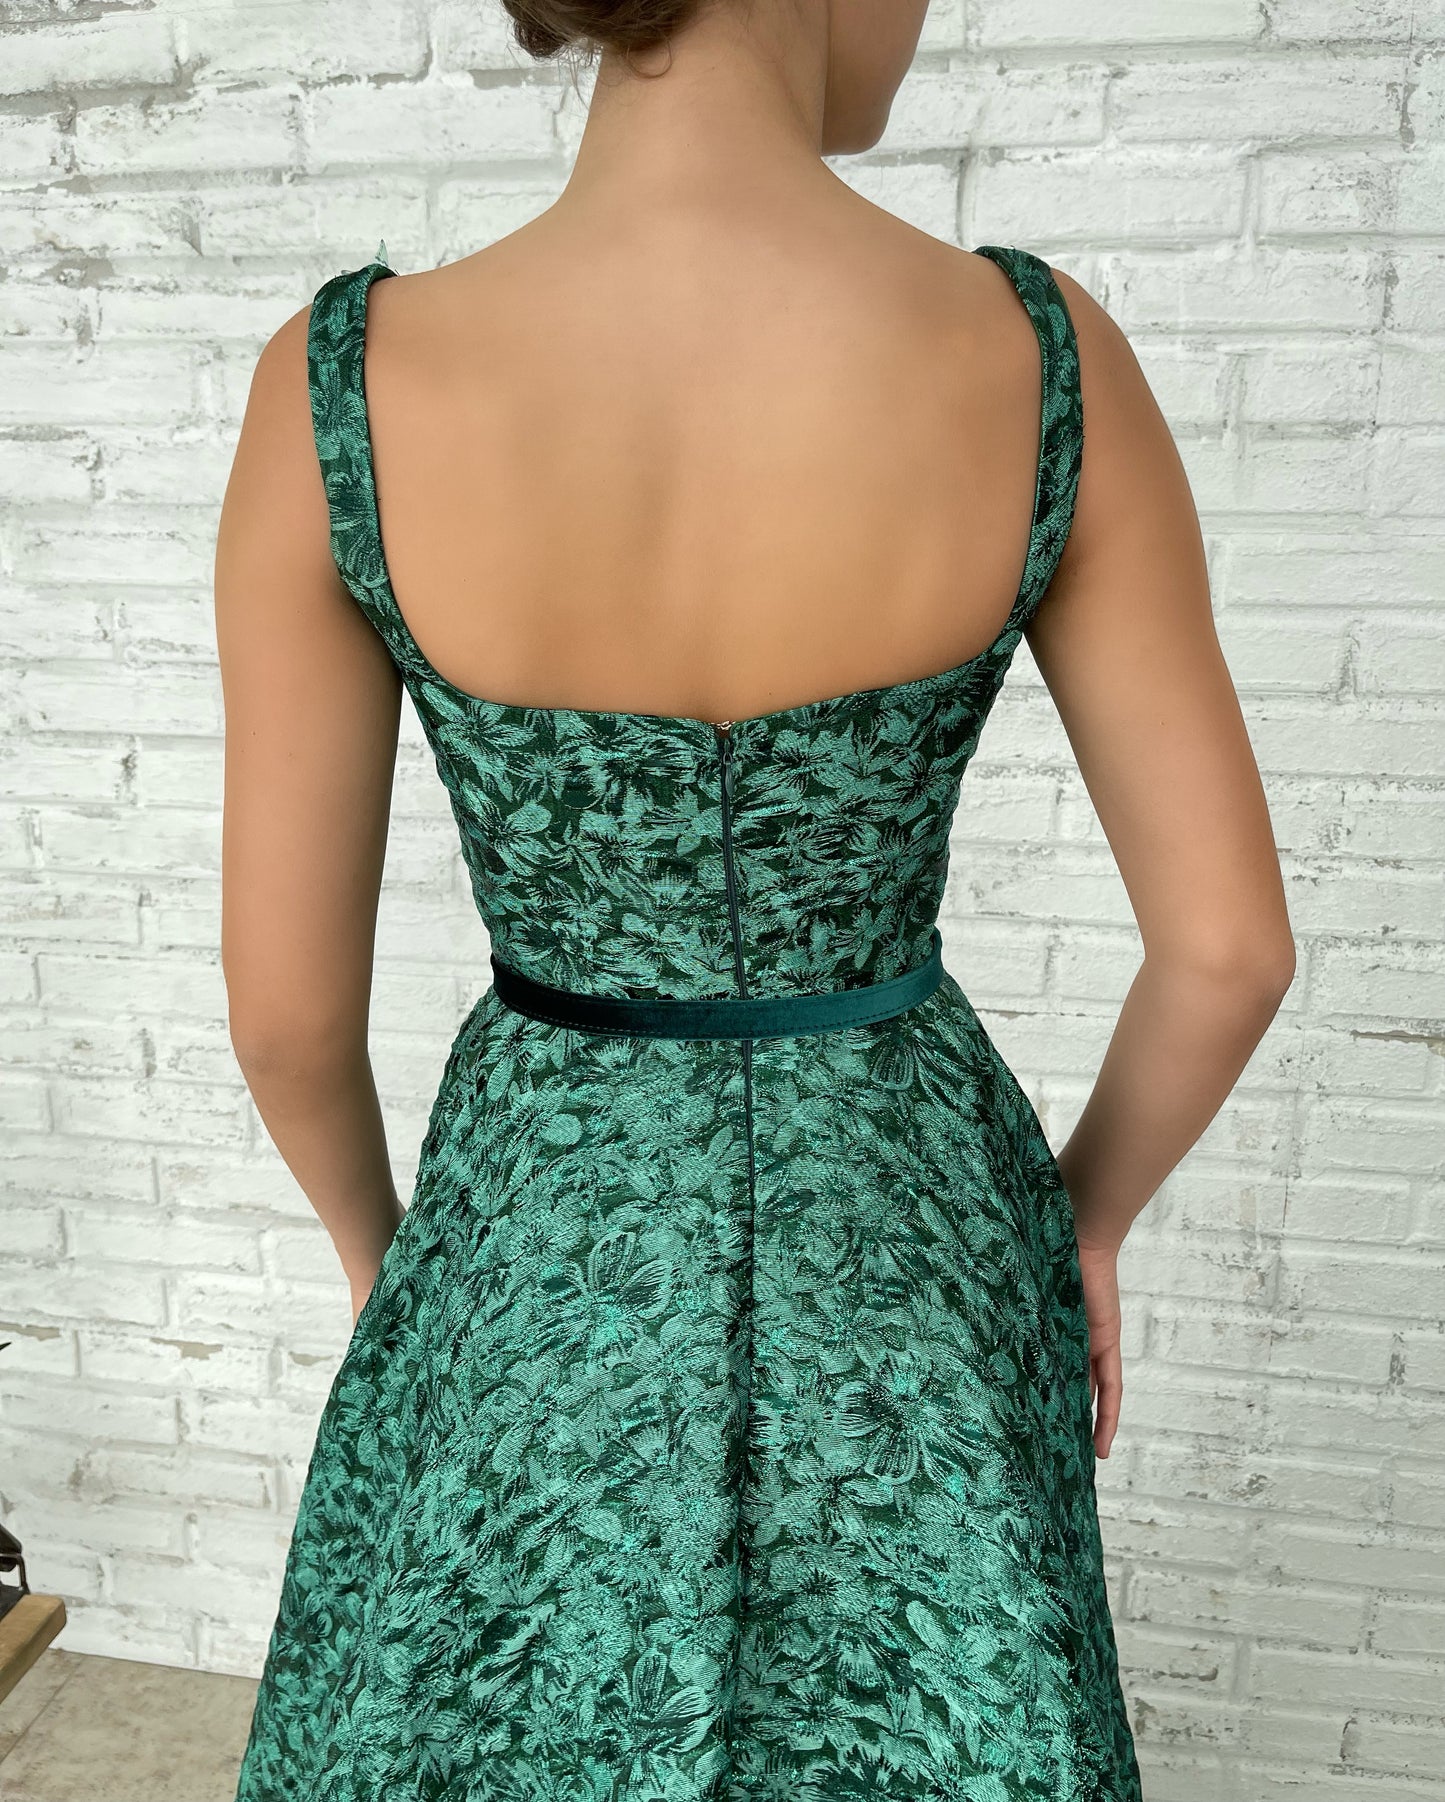 Green A-Line dress with straps, embroidery and belt